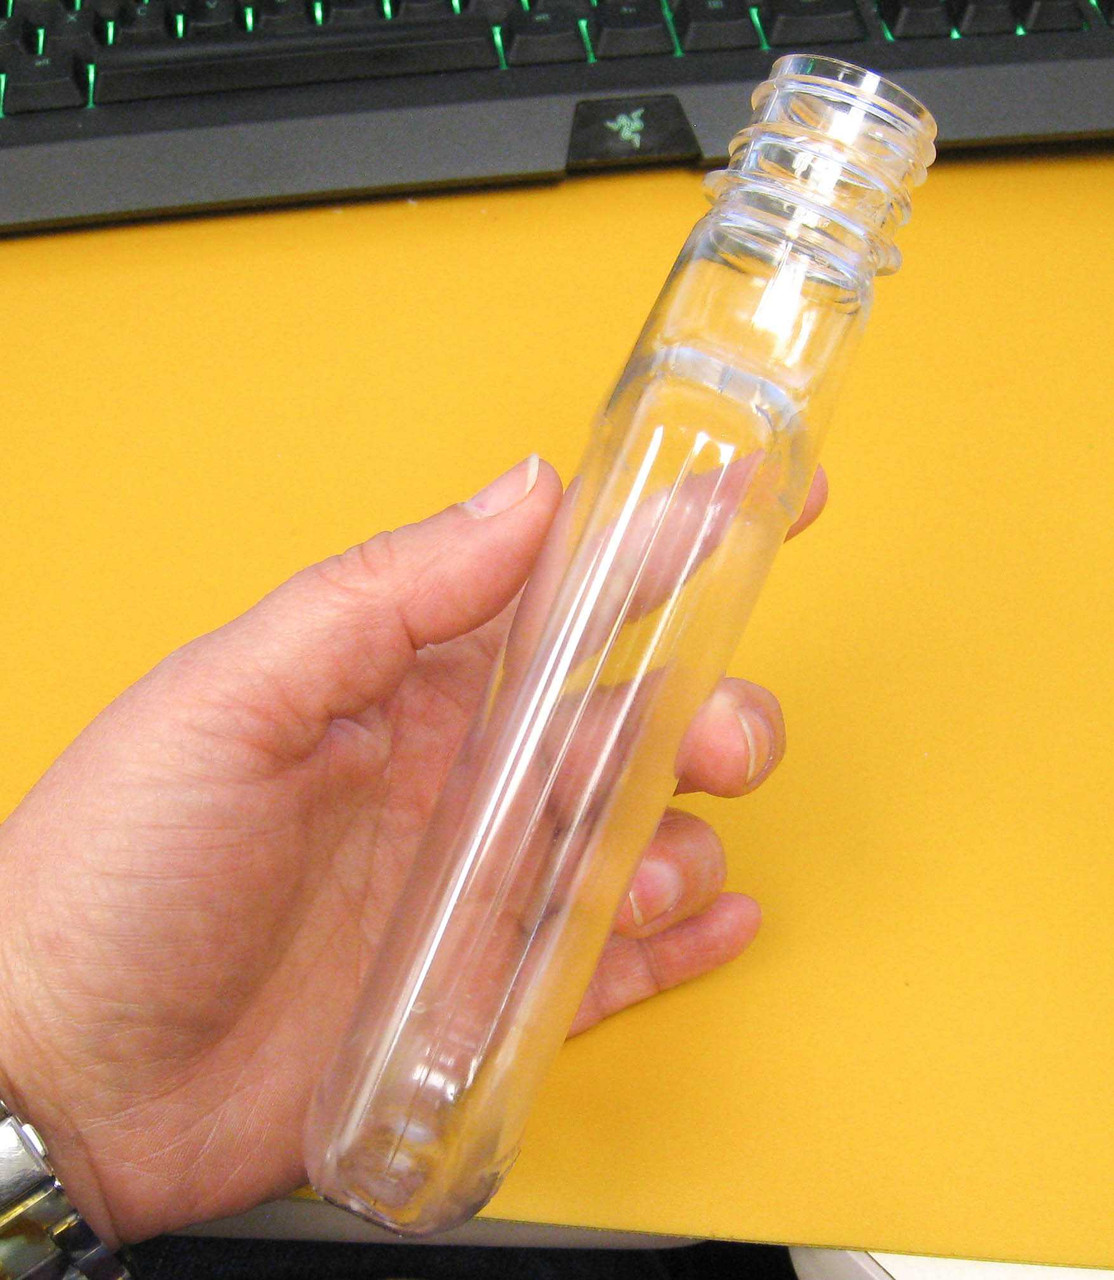 https://cdn11.bigcommerce.com/s-1ybtx/images/stencil/1280x1280/products/1206/6539/200-ml-PET-Clear-Plastic-Flask-Bottle-with-Tamper-Evident-Cap_4947__33101.1674335525.jpg?c=2?imbypass=on